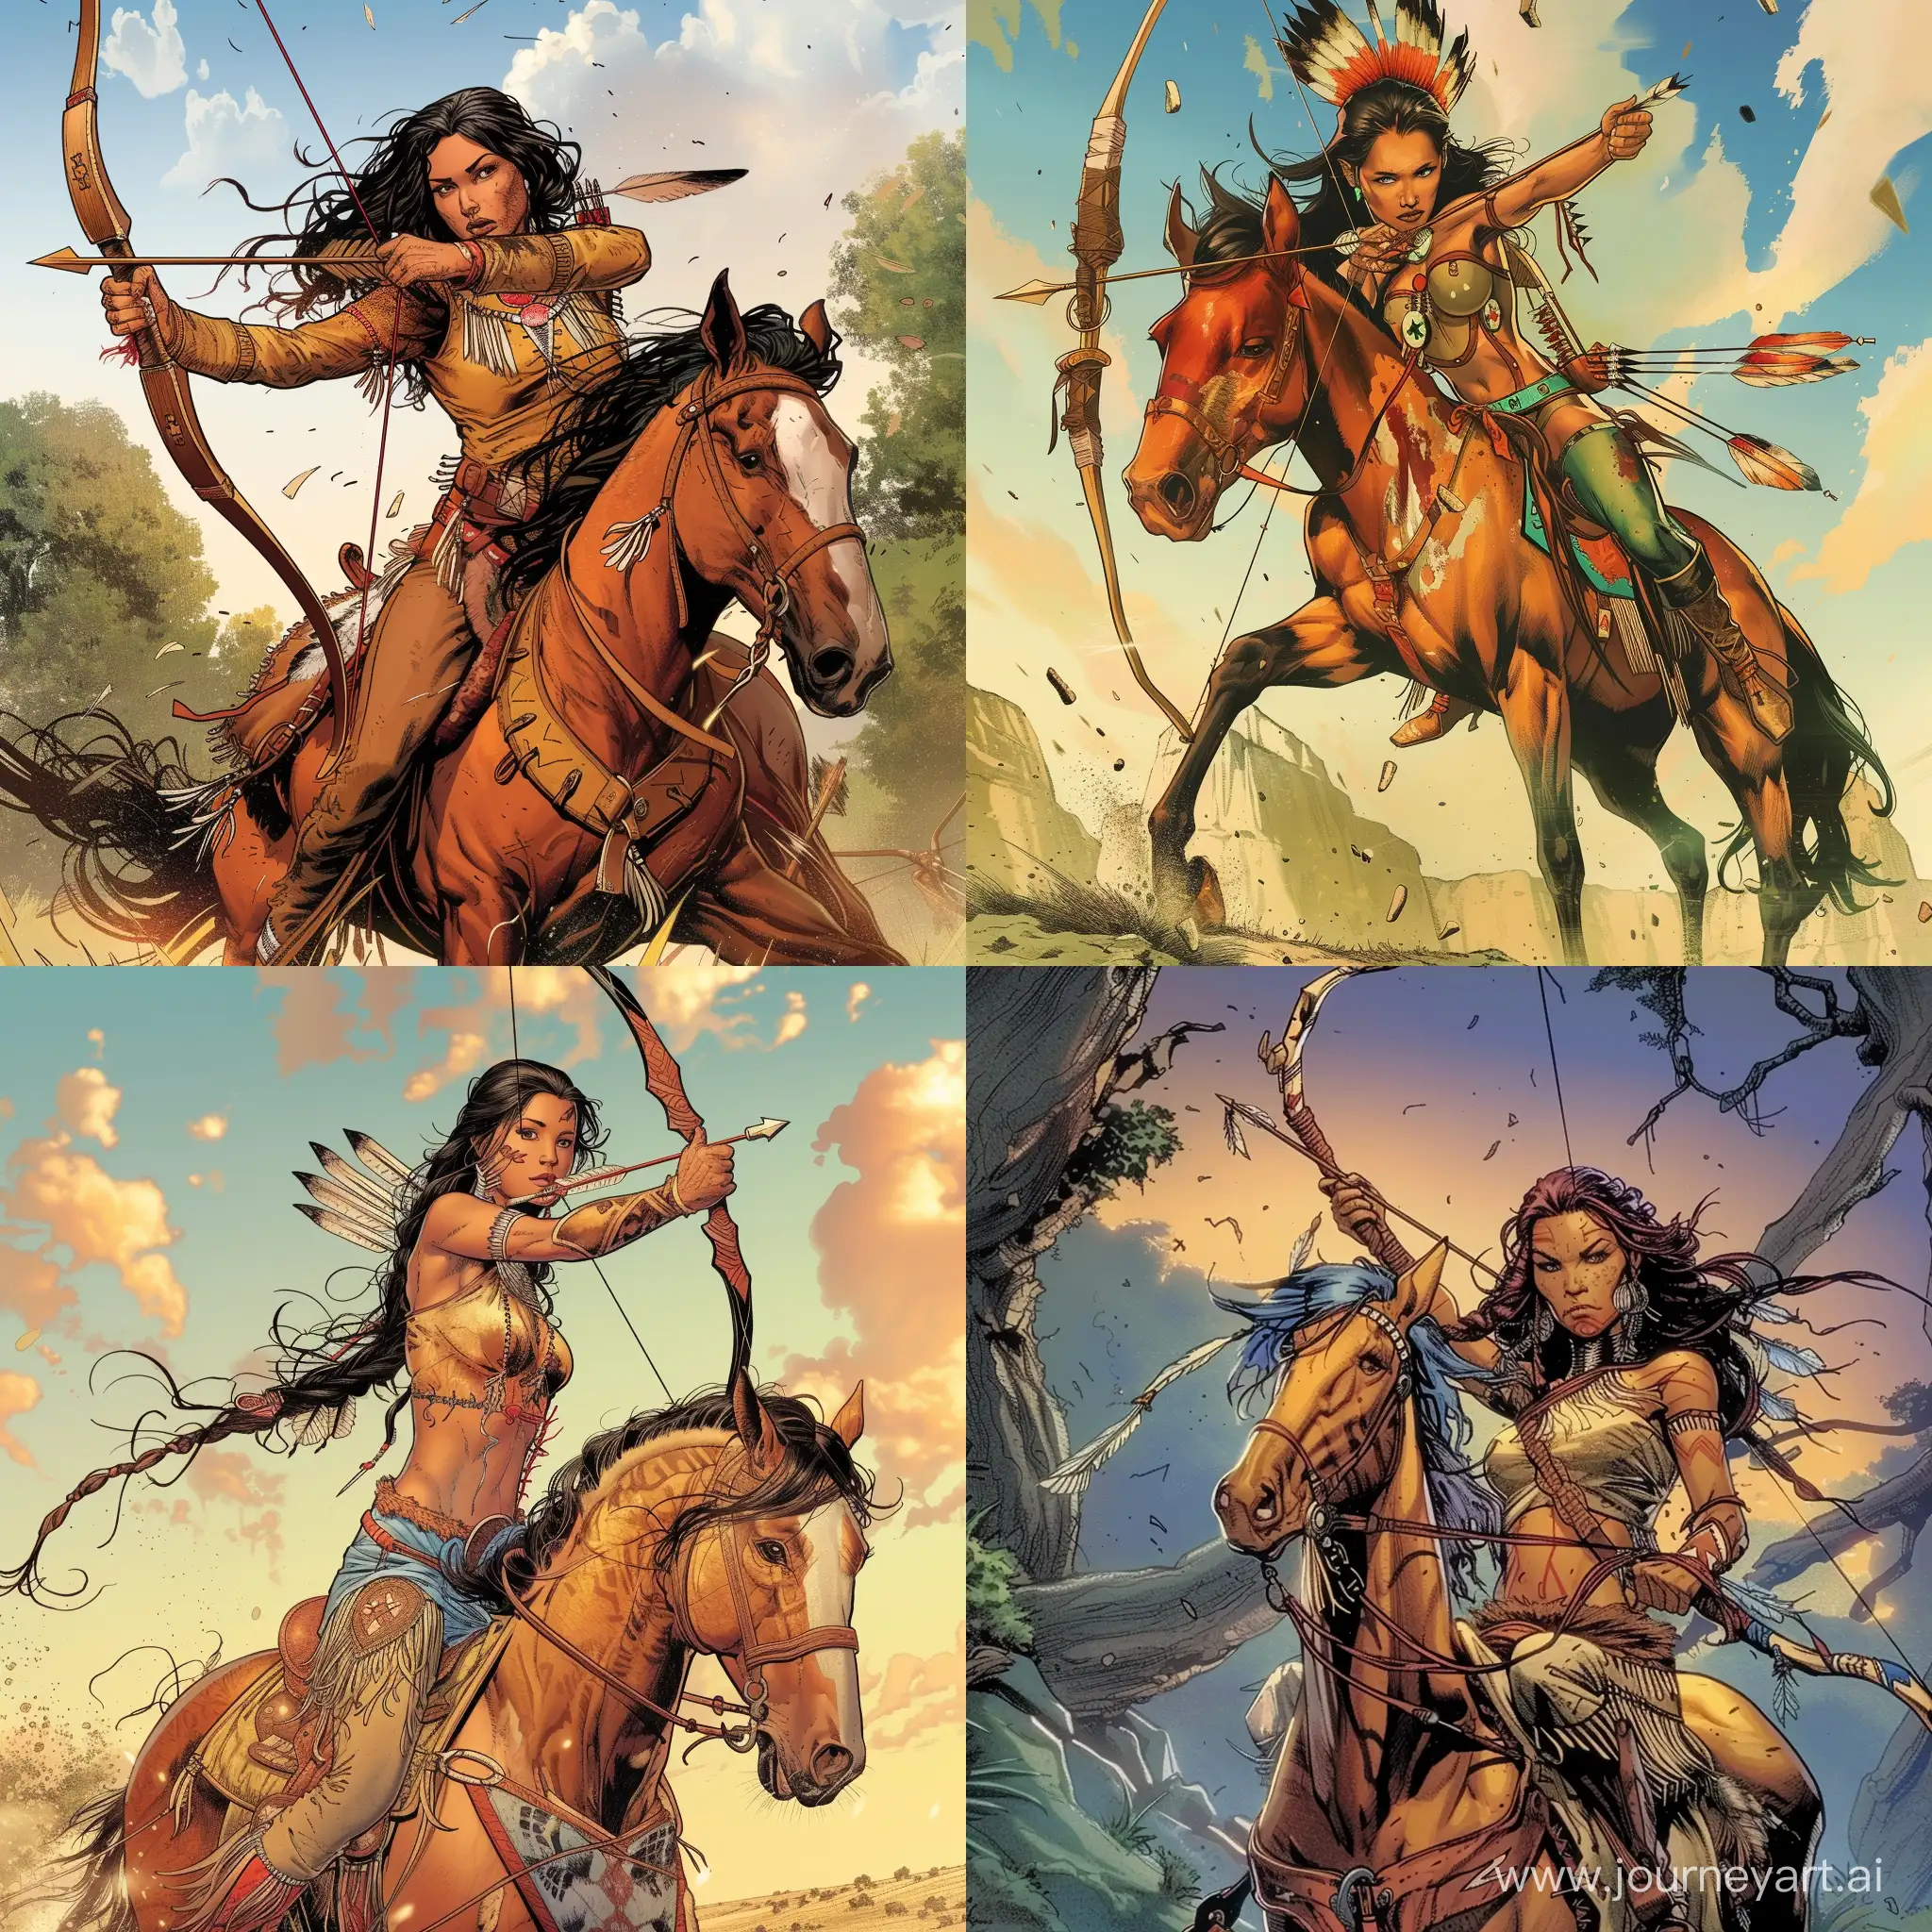 Native-American-Woman-Riding-Horse-with-Bow-and-Arrow